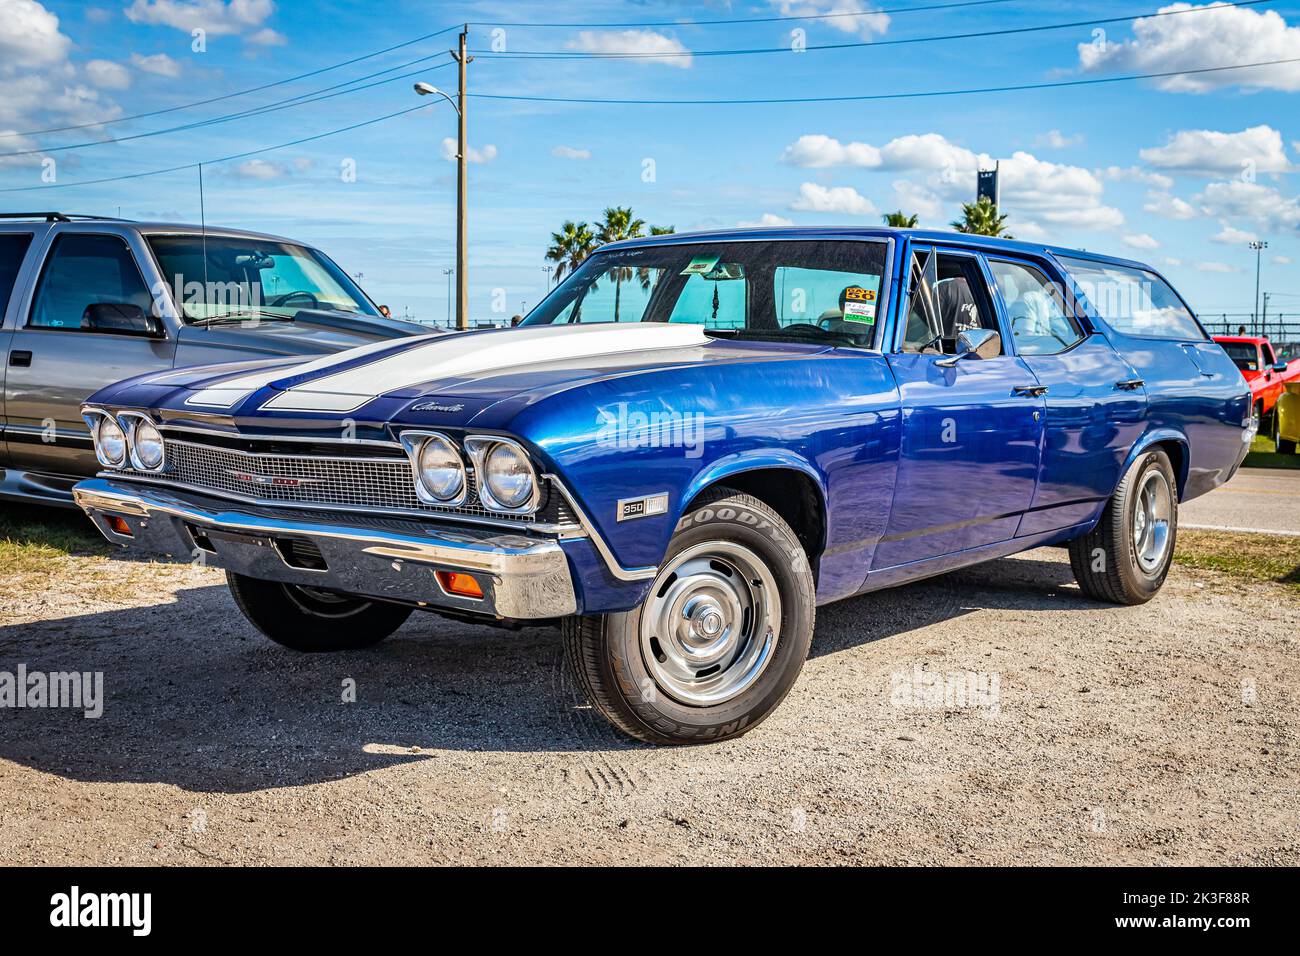 Daytona Beach, FL - November 28, 2020: Low perspective front corner view of a 1968 Chevrolet Chevelle Station Wagon at a local car show. Stock Photo